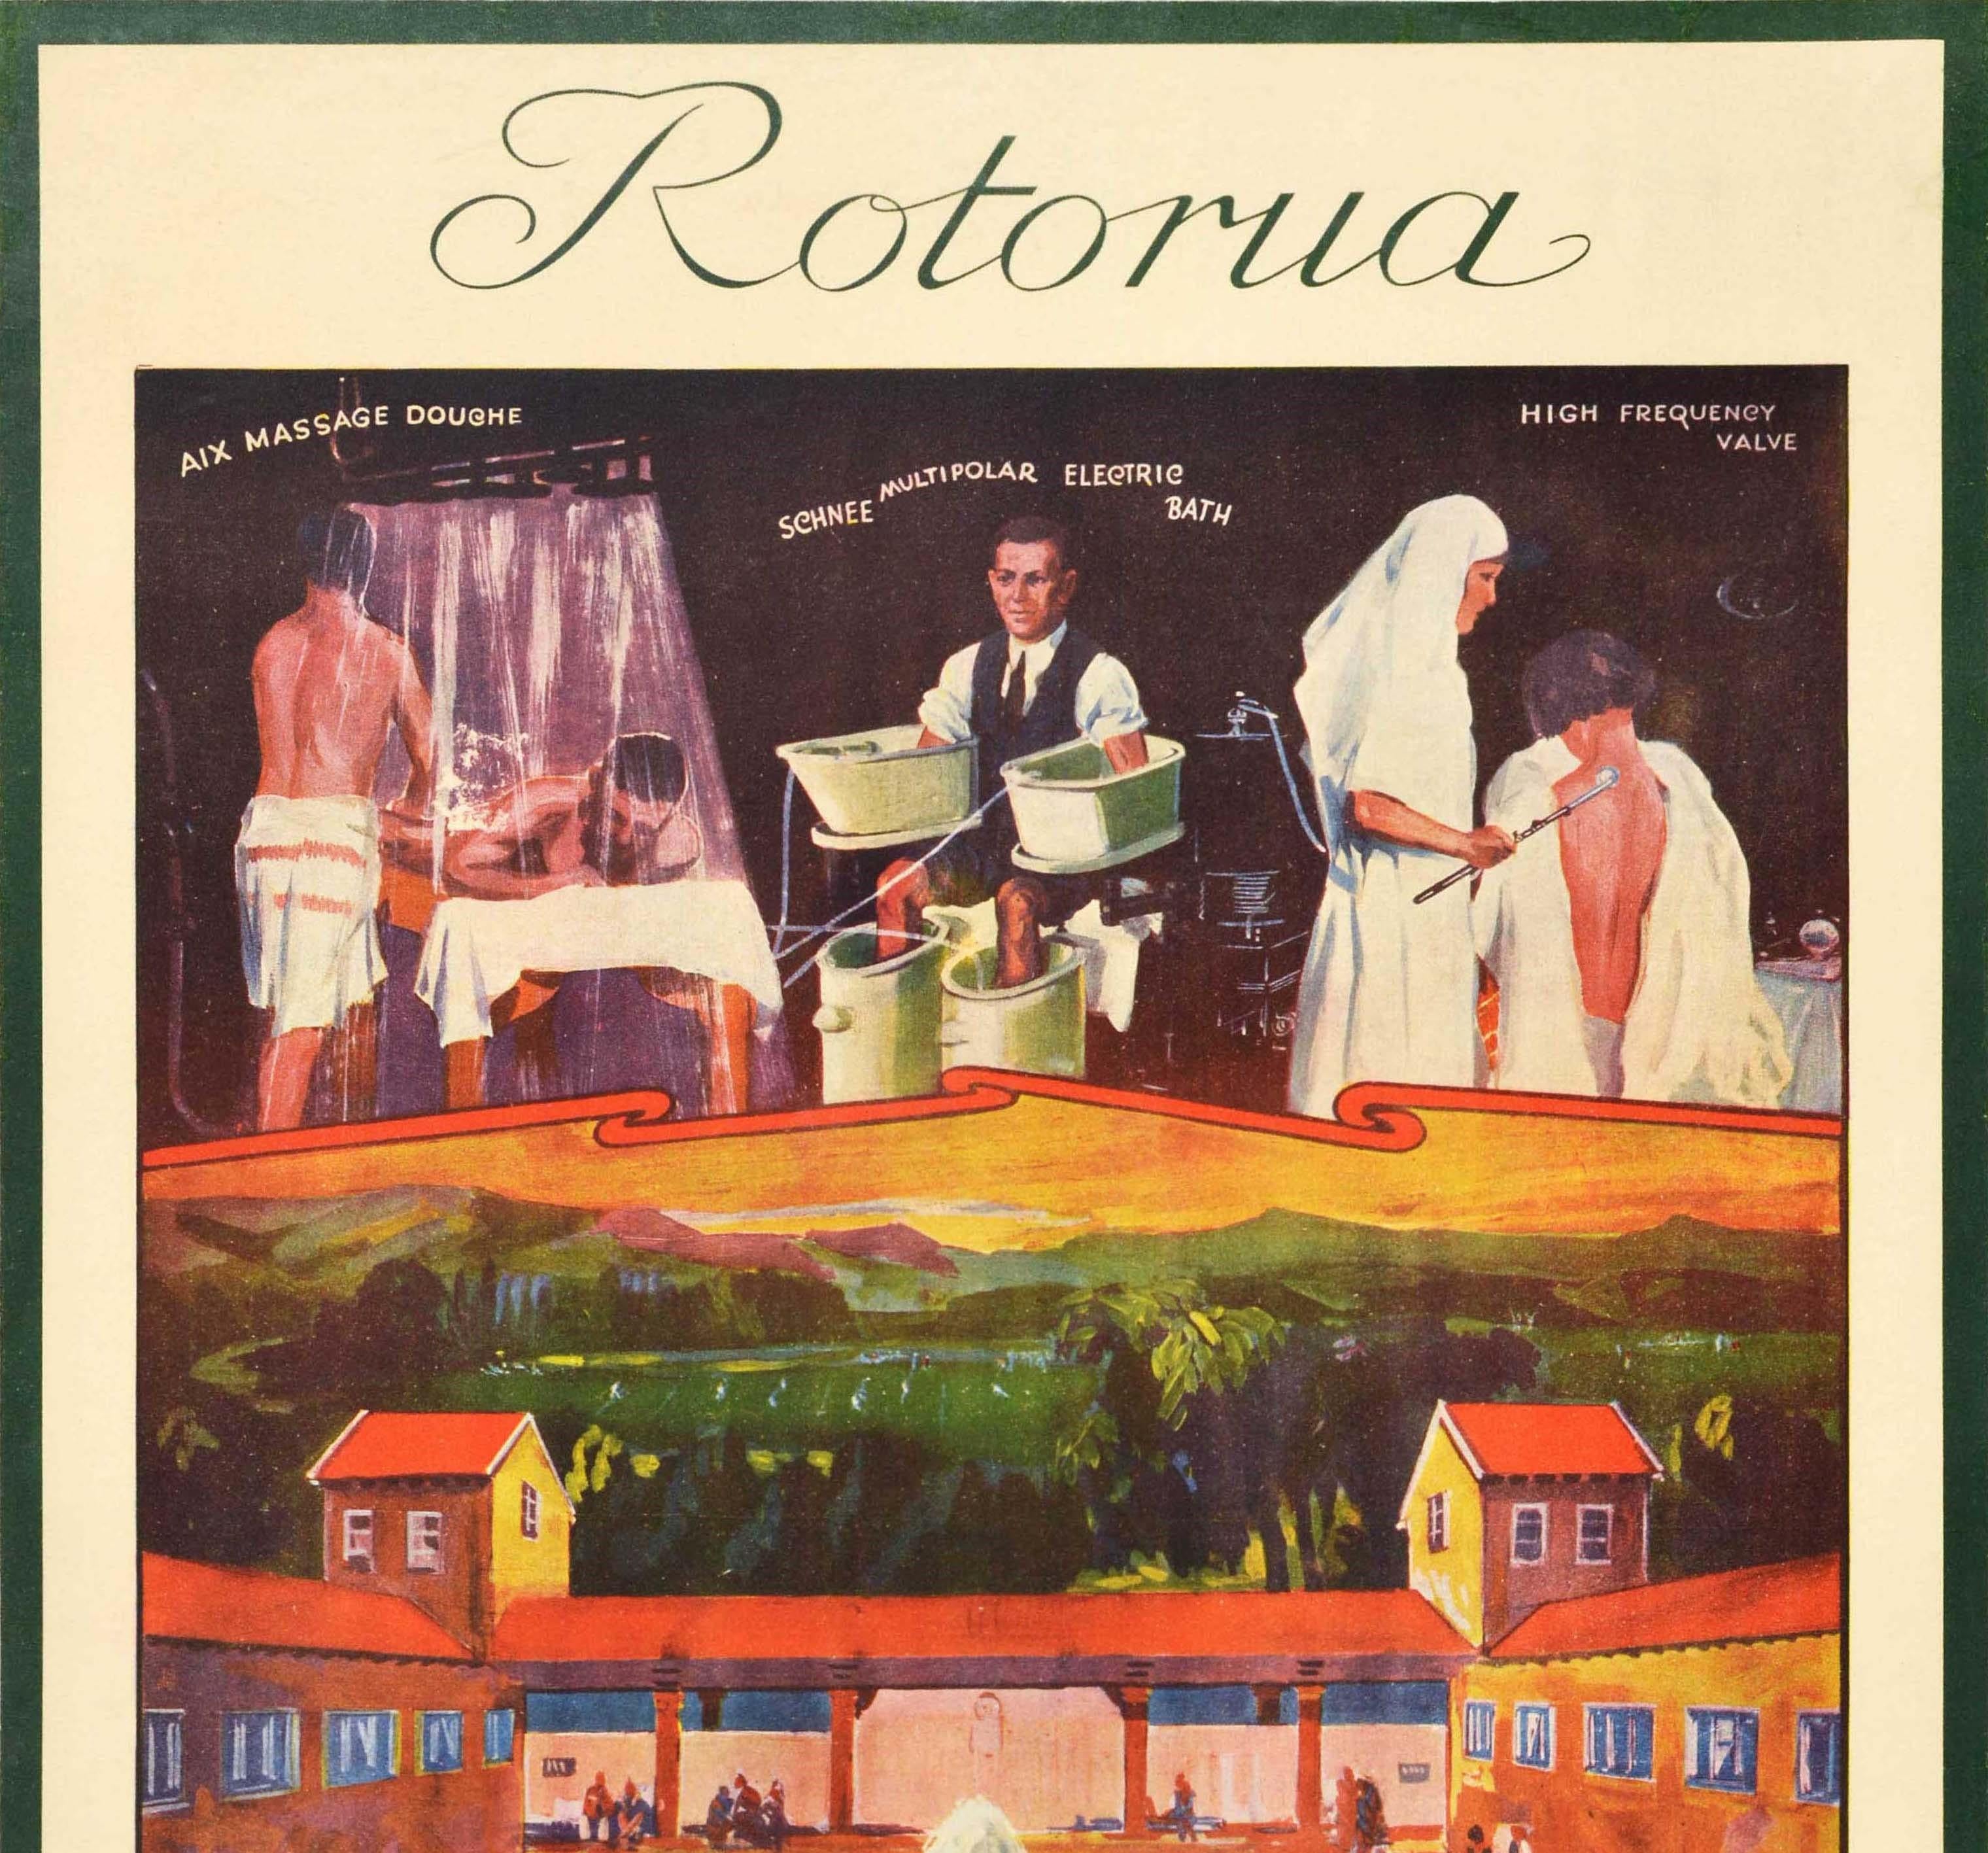 Original vintage travel poster advertising Rotorua Nature's Cure New Zealand Thermal Waters Health and Recreation featuring a colourful image of people swimming and relaxing at the Rotorua Blue Baths (opened 1932) with a fountain in the foreground